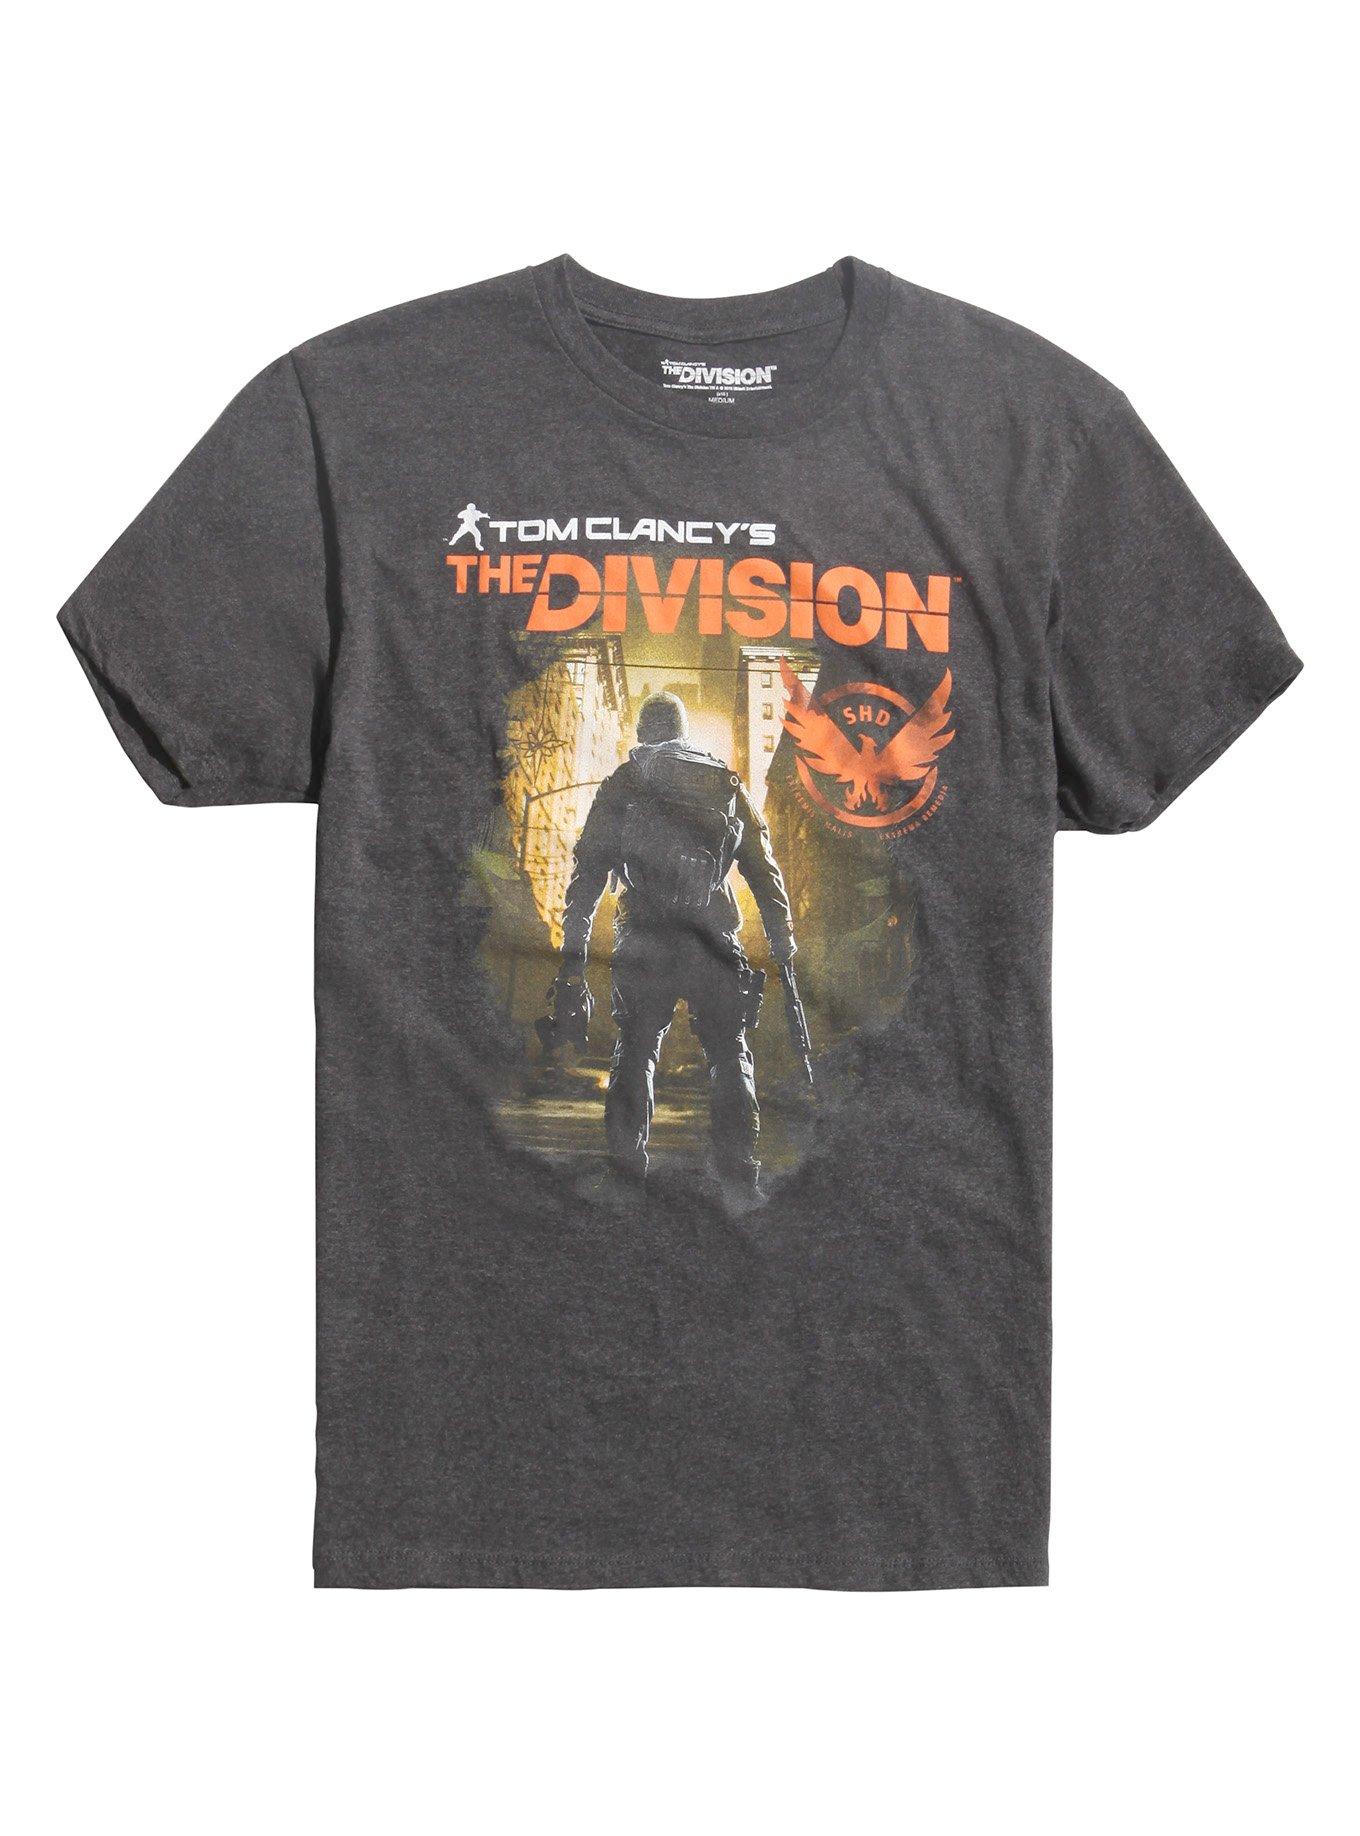 Tom Clancy's The Division Cover Art T-Shirt, BLACK, hi-res